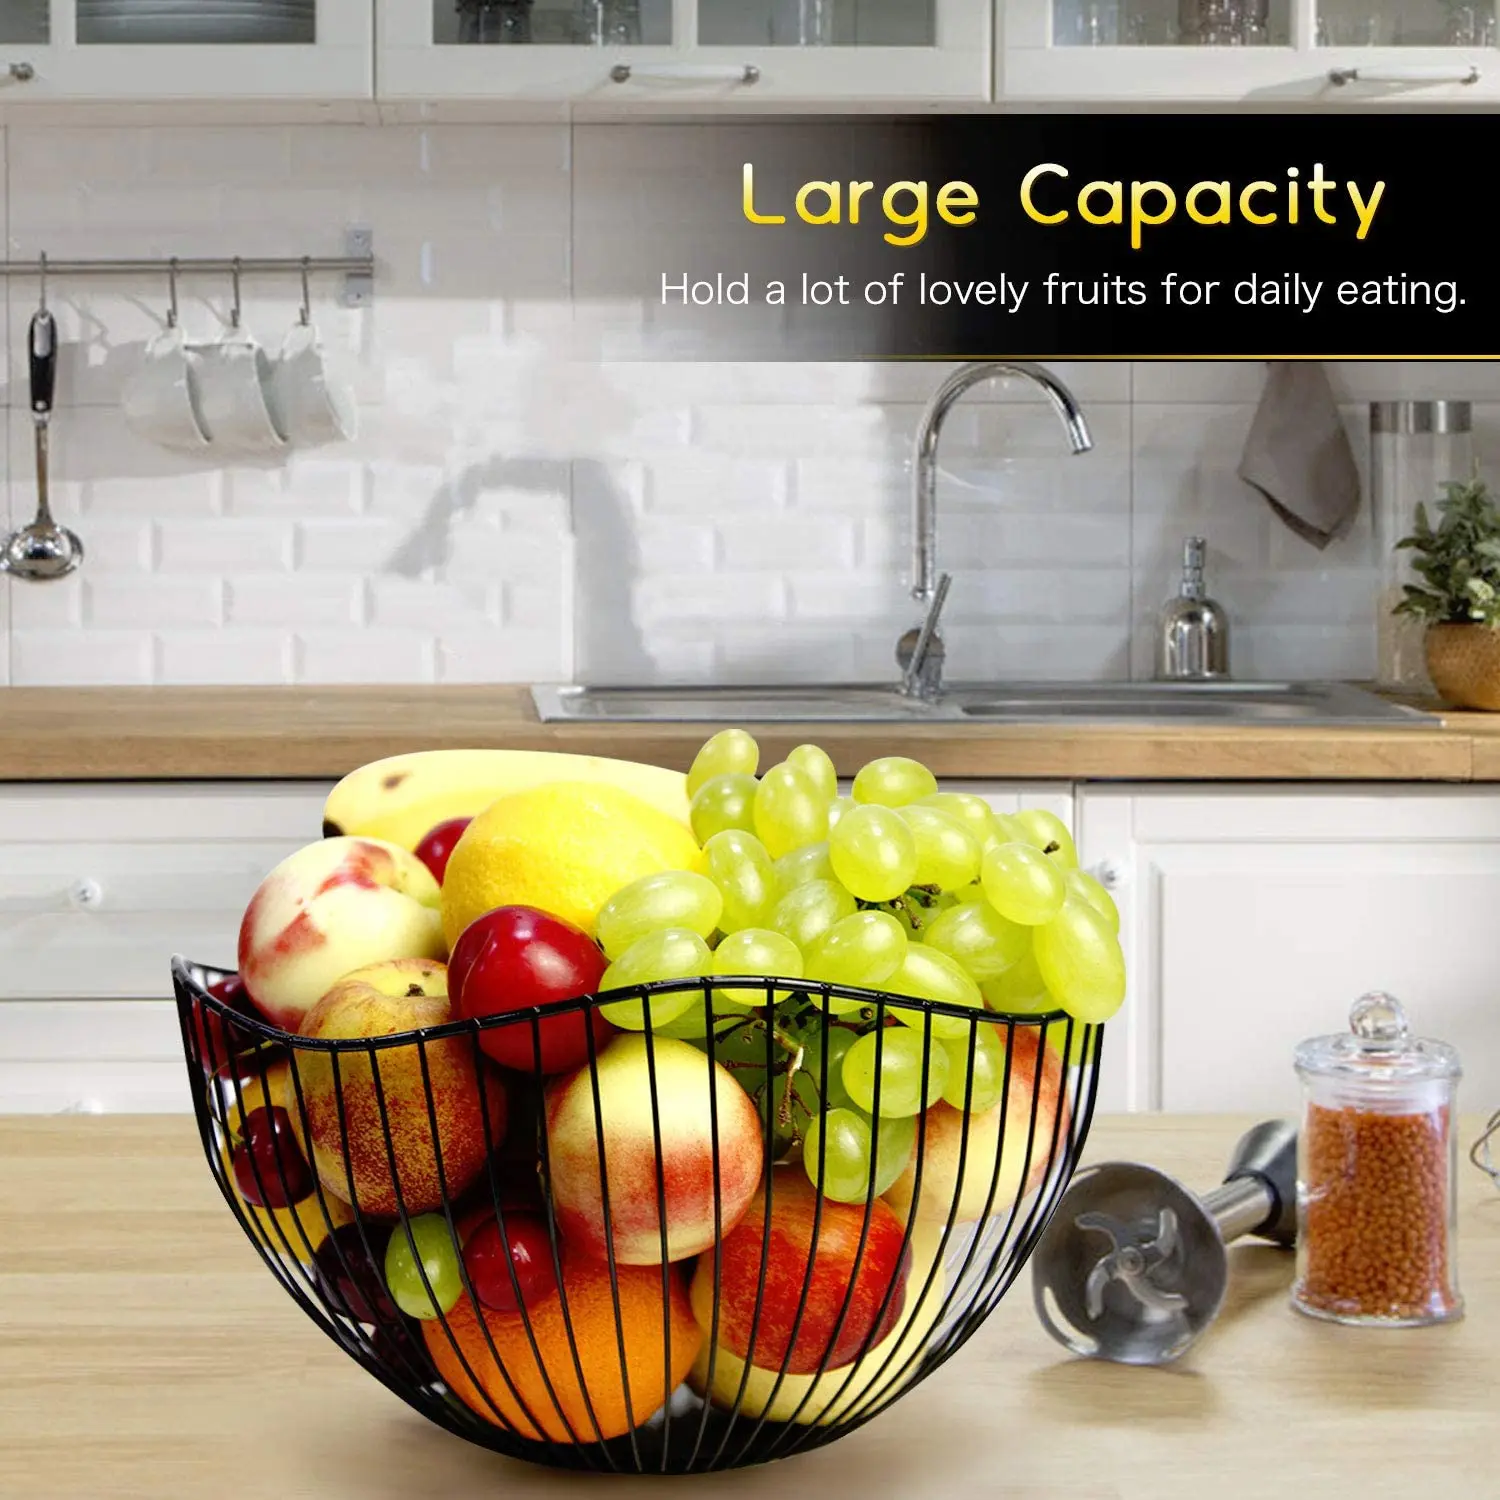 Egg Candy Restaurant Large Gold Decorative Table Centerpiece Holder for Bread K Cup 10 Inch Metal Mesh Creative Countertop Fruit Basket Bowl Stand for Modern Kitchen 